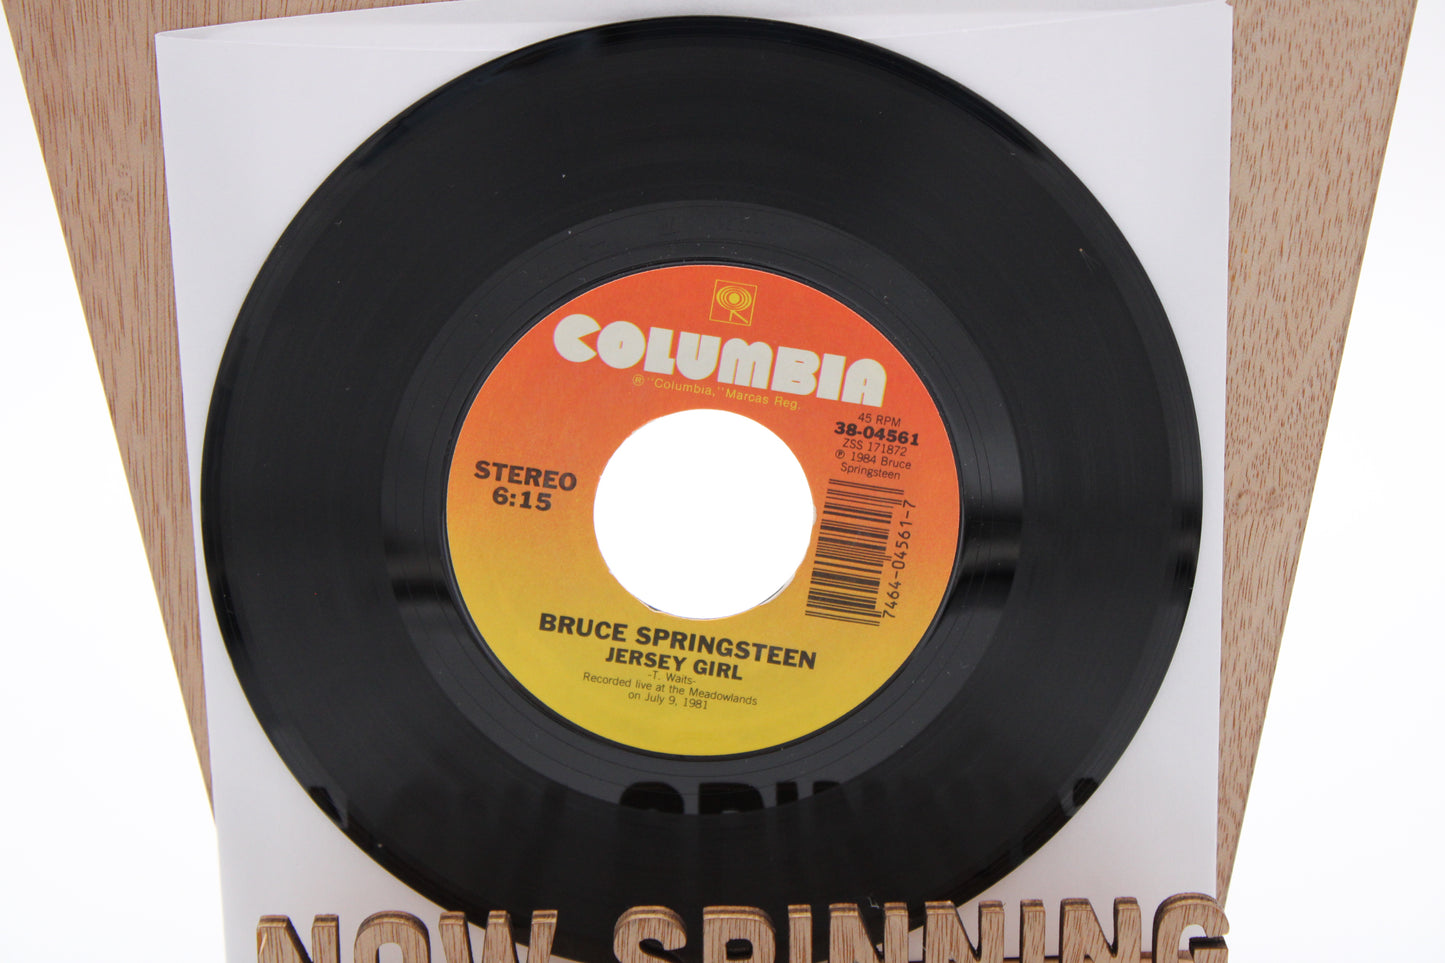 Bruce Springsteen - Cover Me & Jersey Girl  - 45 Record - Original from 1984 NM Condition